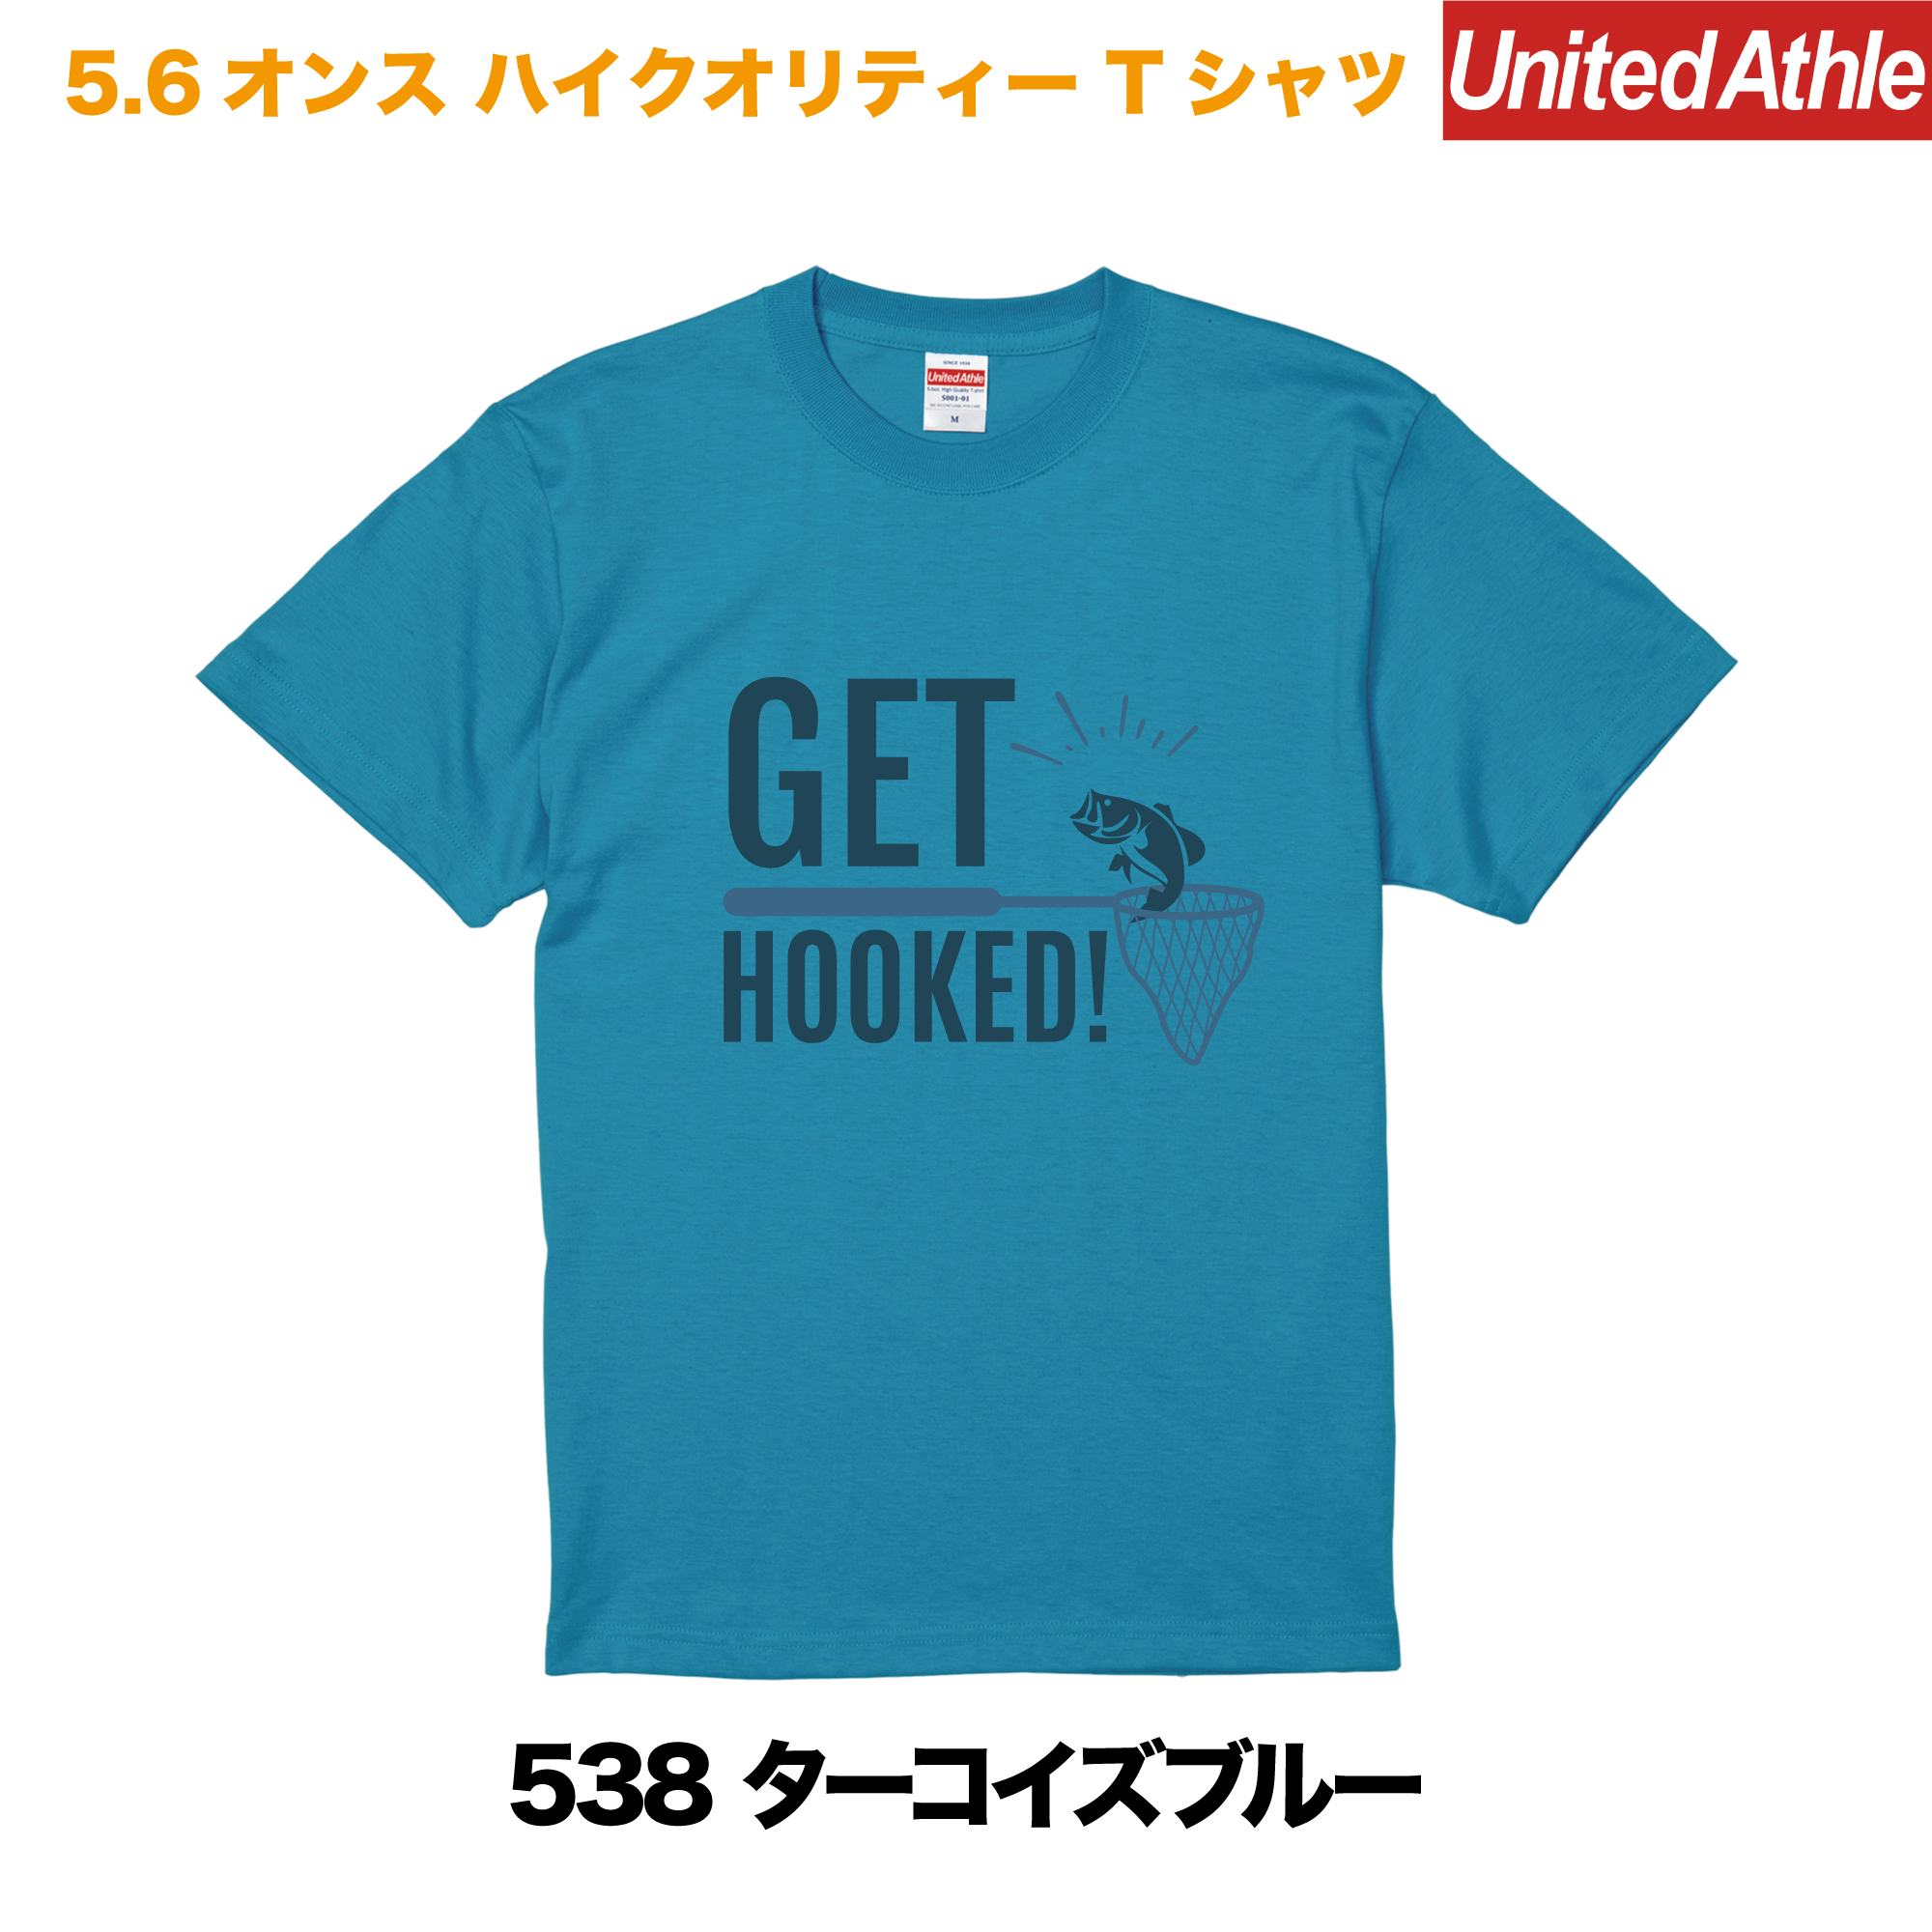 GET HOOKED　プリントTシャツ　5001-01【ターコイズブルー】＜アダルト＞